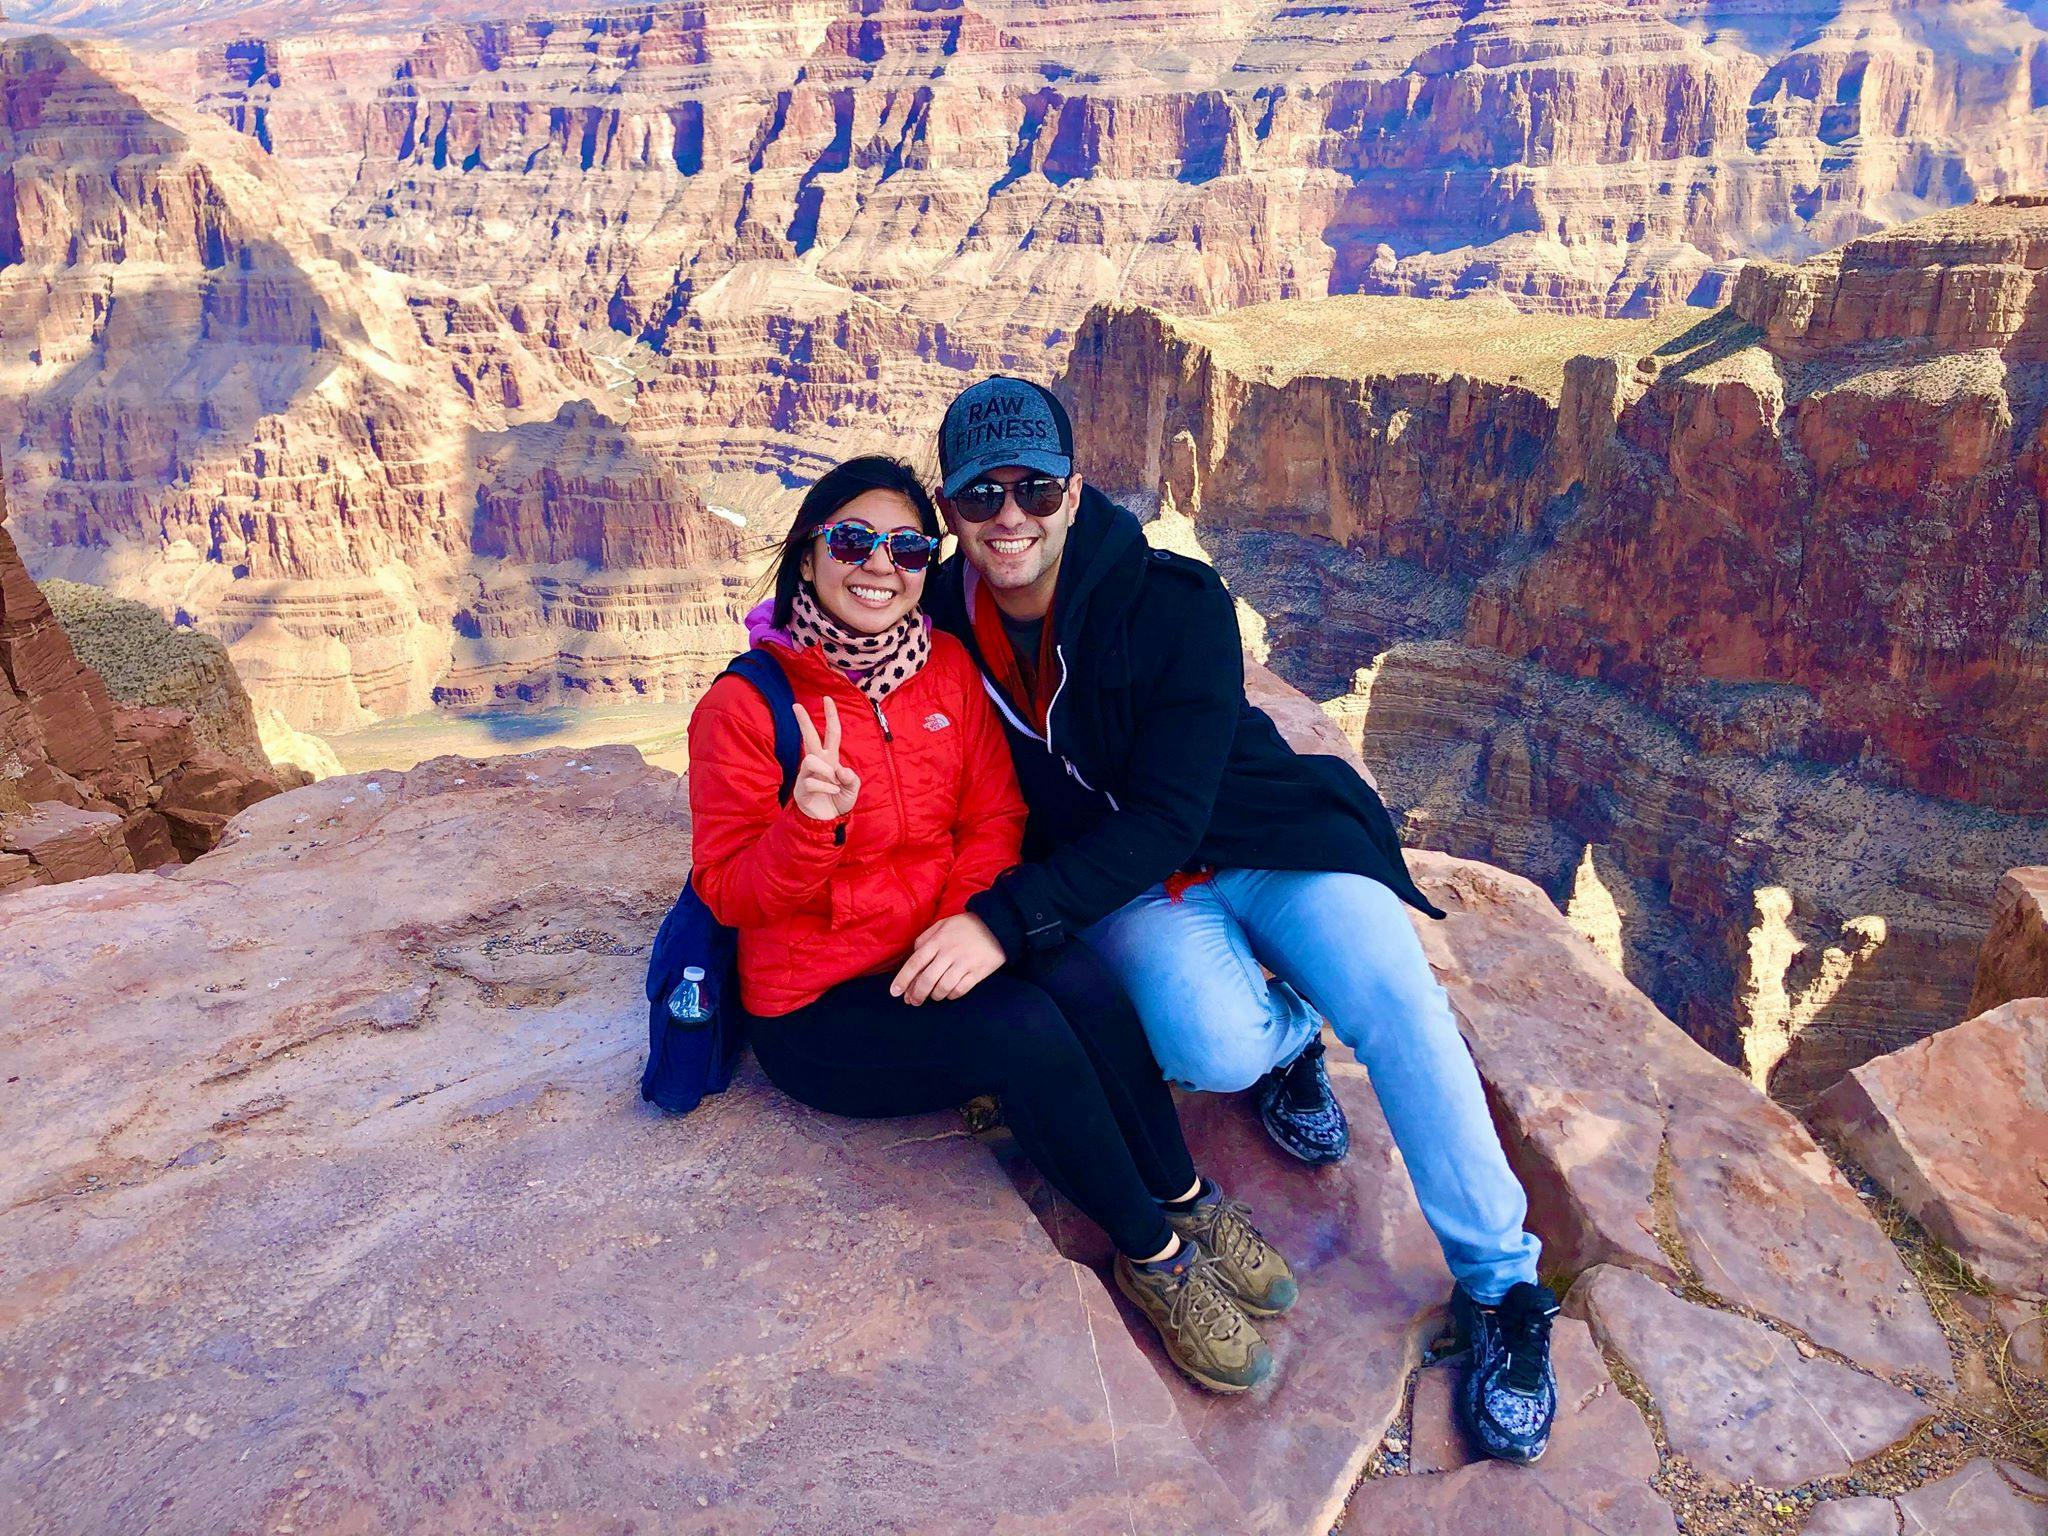 Grand Canyon West Rim bus tour with optional Skywalk and Hoover Dam Photo Stop